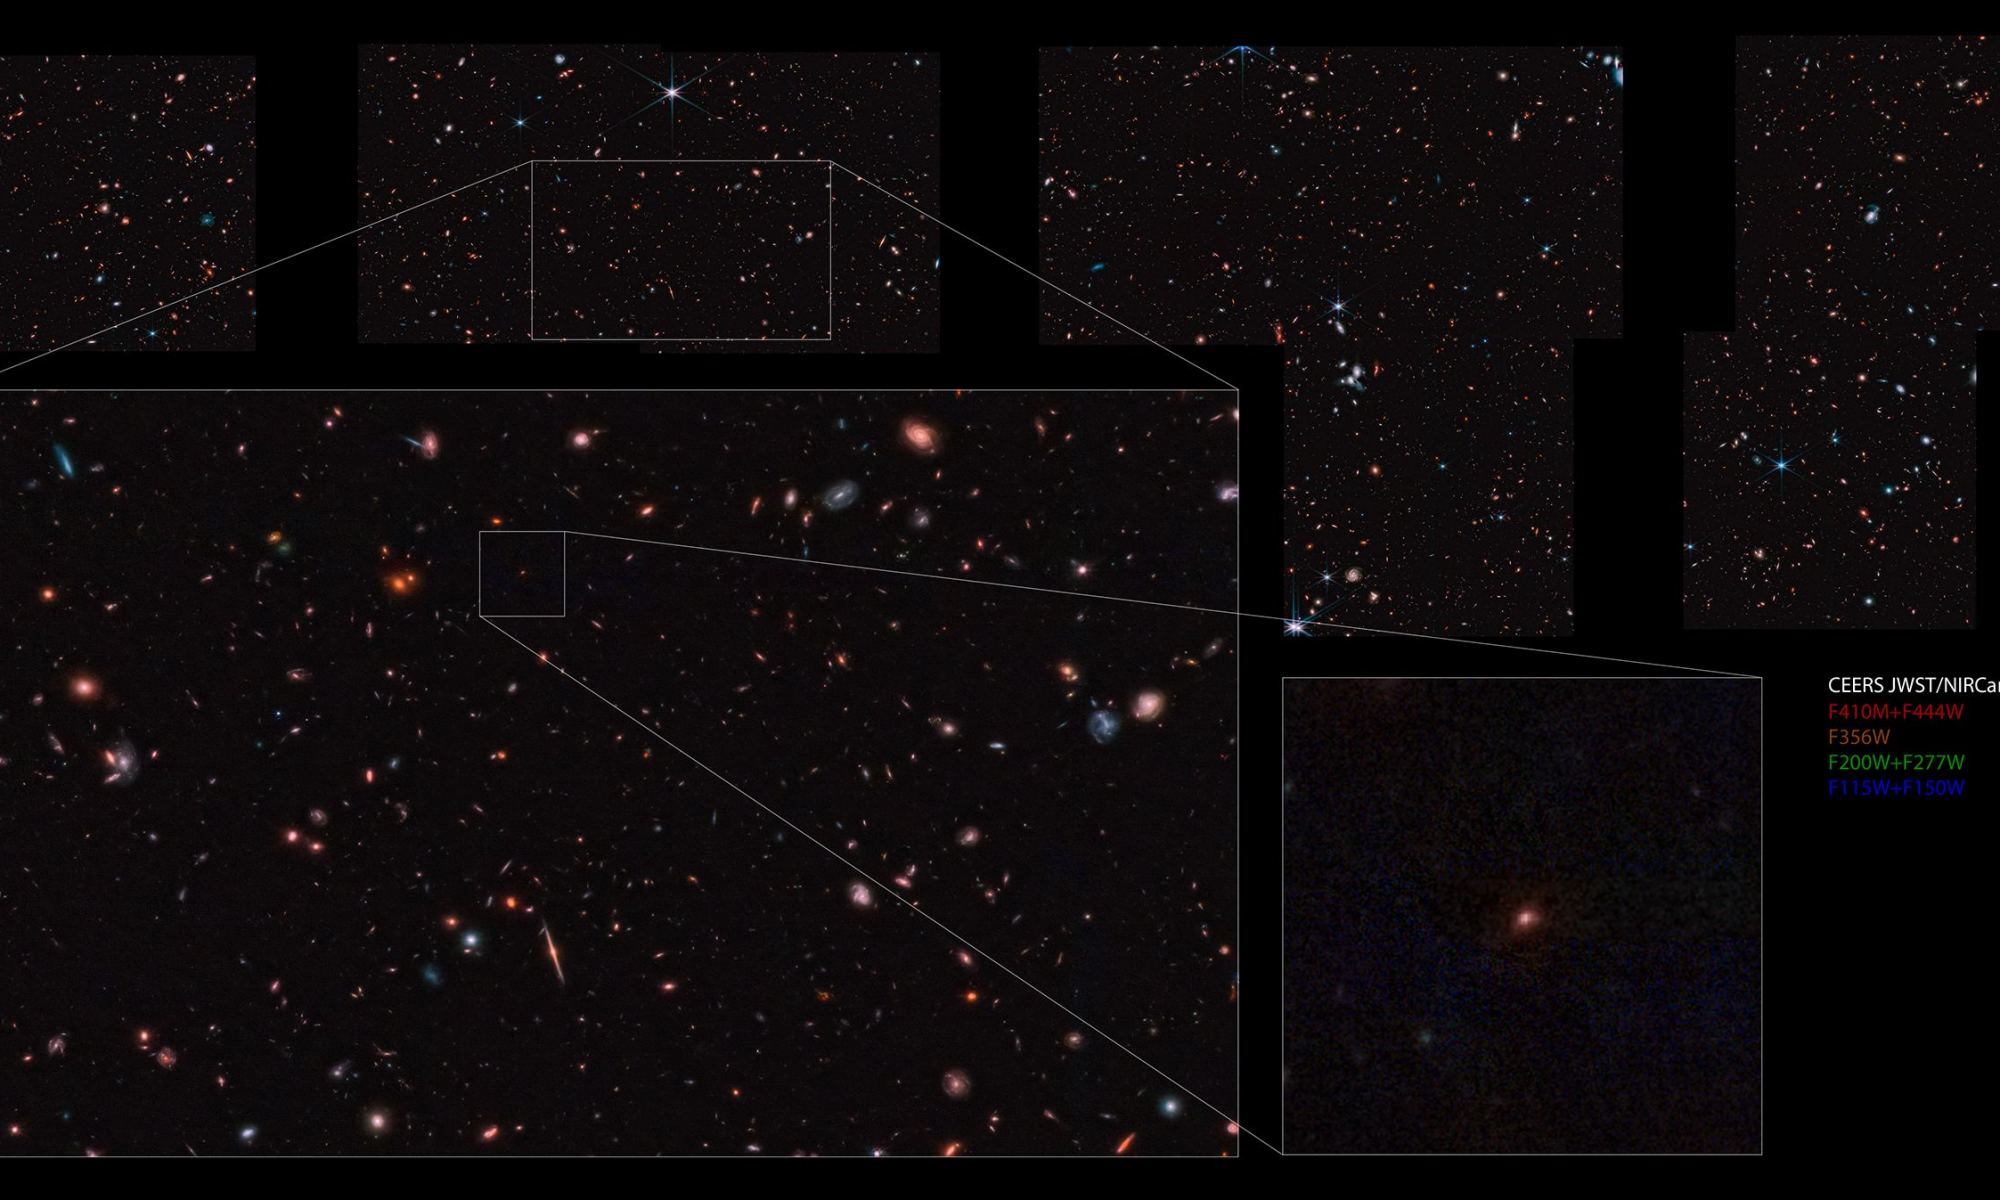 Scientists with the CEERS Collaboration have identified an object (Maisie’s galaxy) that may be one of the earliest and farthest galaxies ever observed. Credit: NASA/STScI/CEERS/TACC/S. Finkelstein/M. Bagley/Z. Levay.